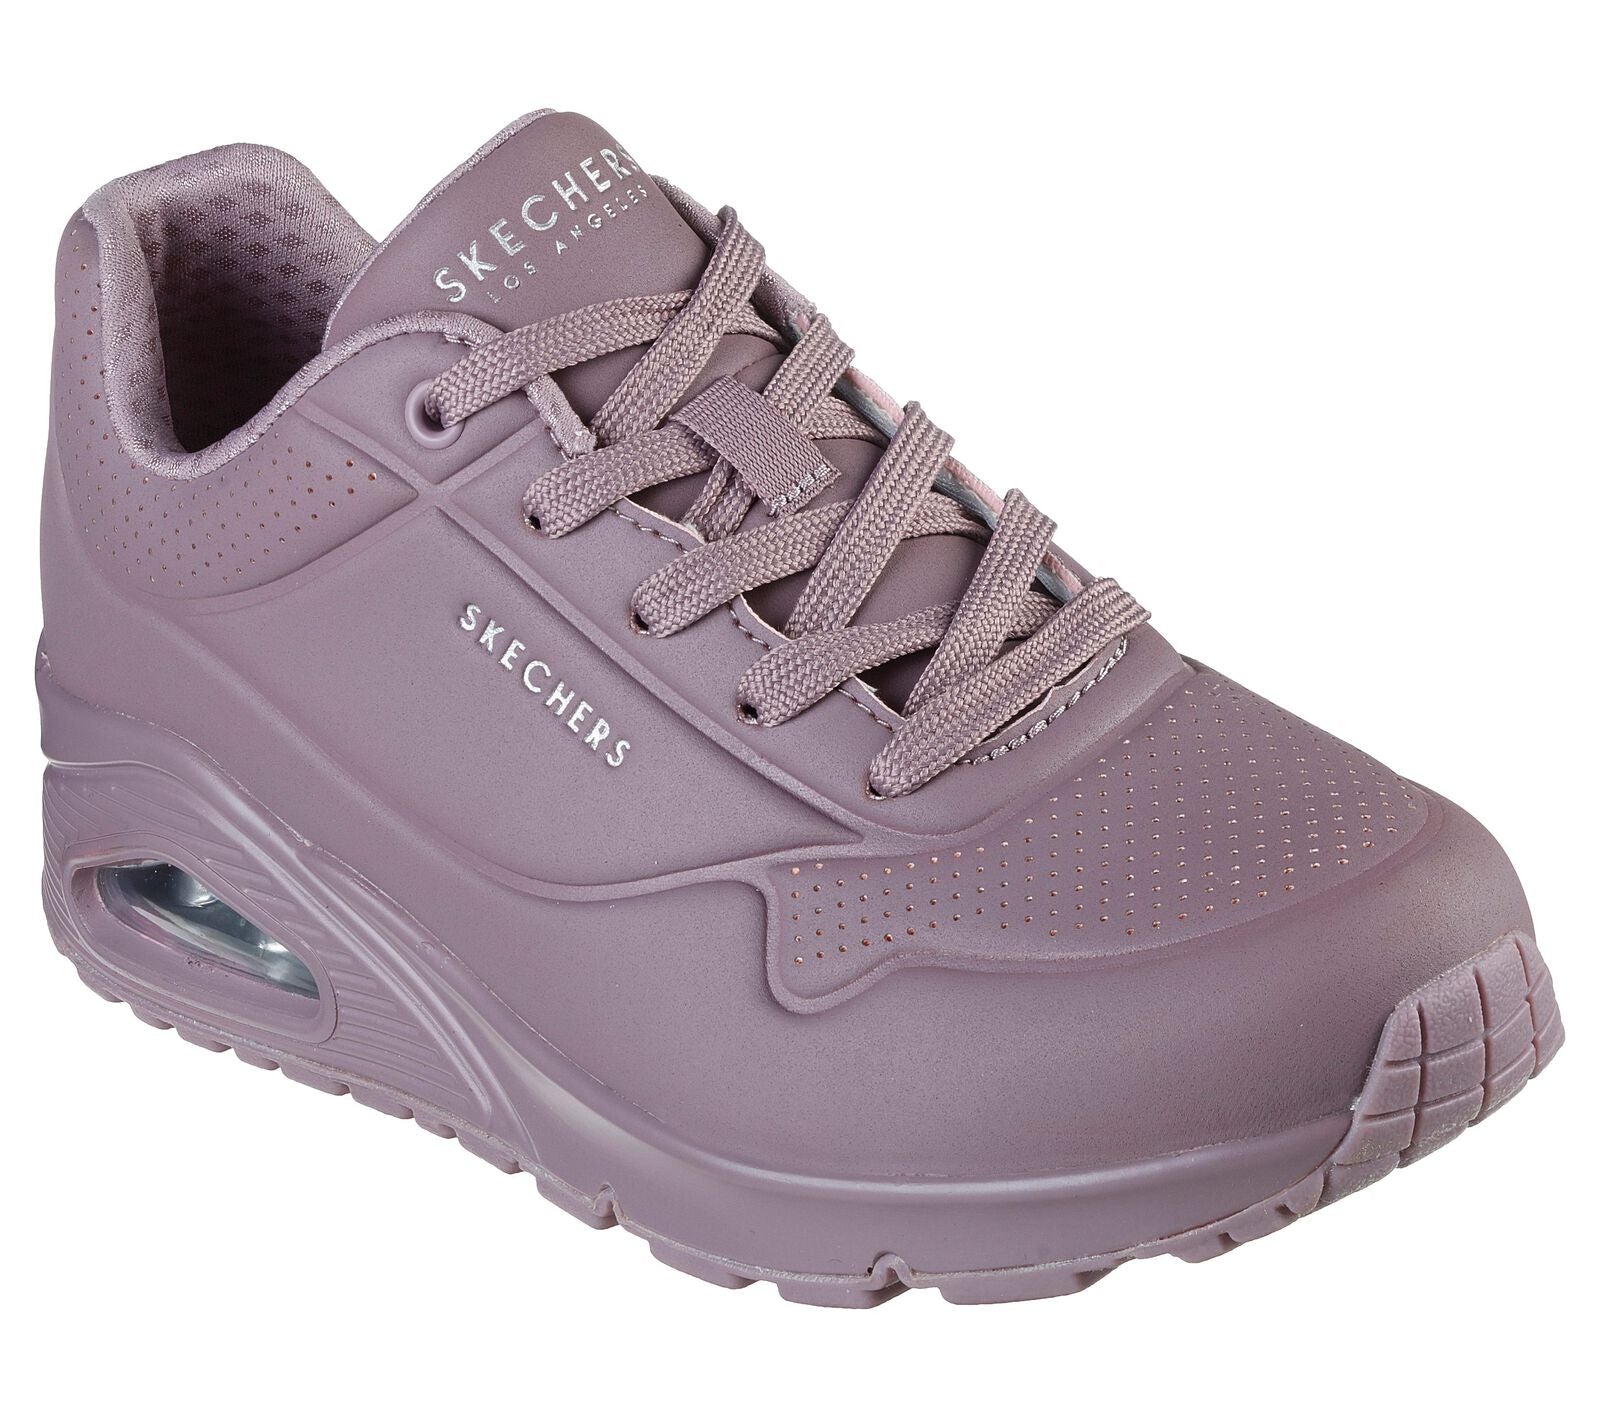 Skechers 73690 Uno Stand On Air Ladies Dark Mauve Textile Lace Up Trainers